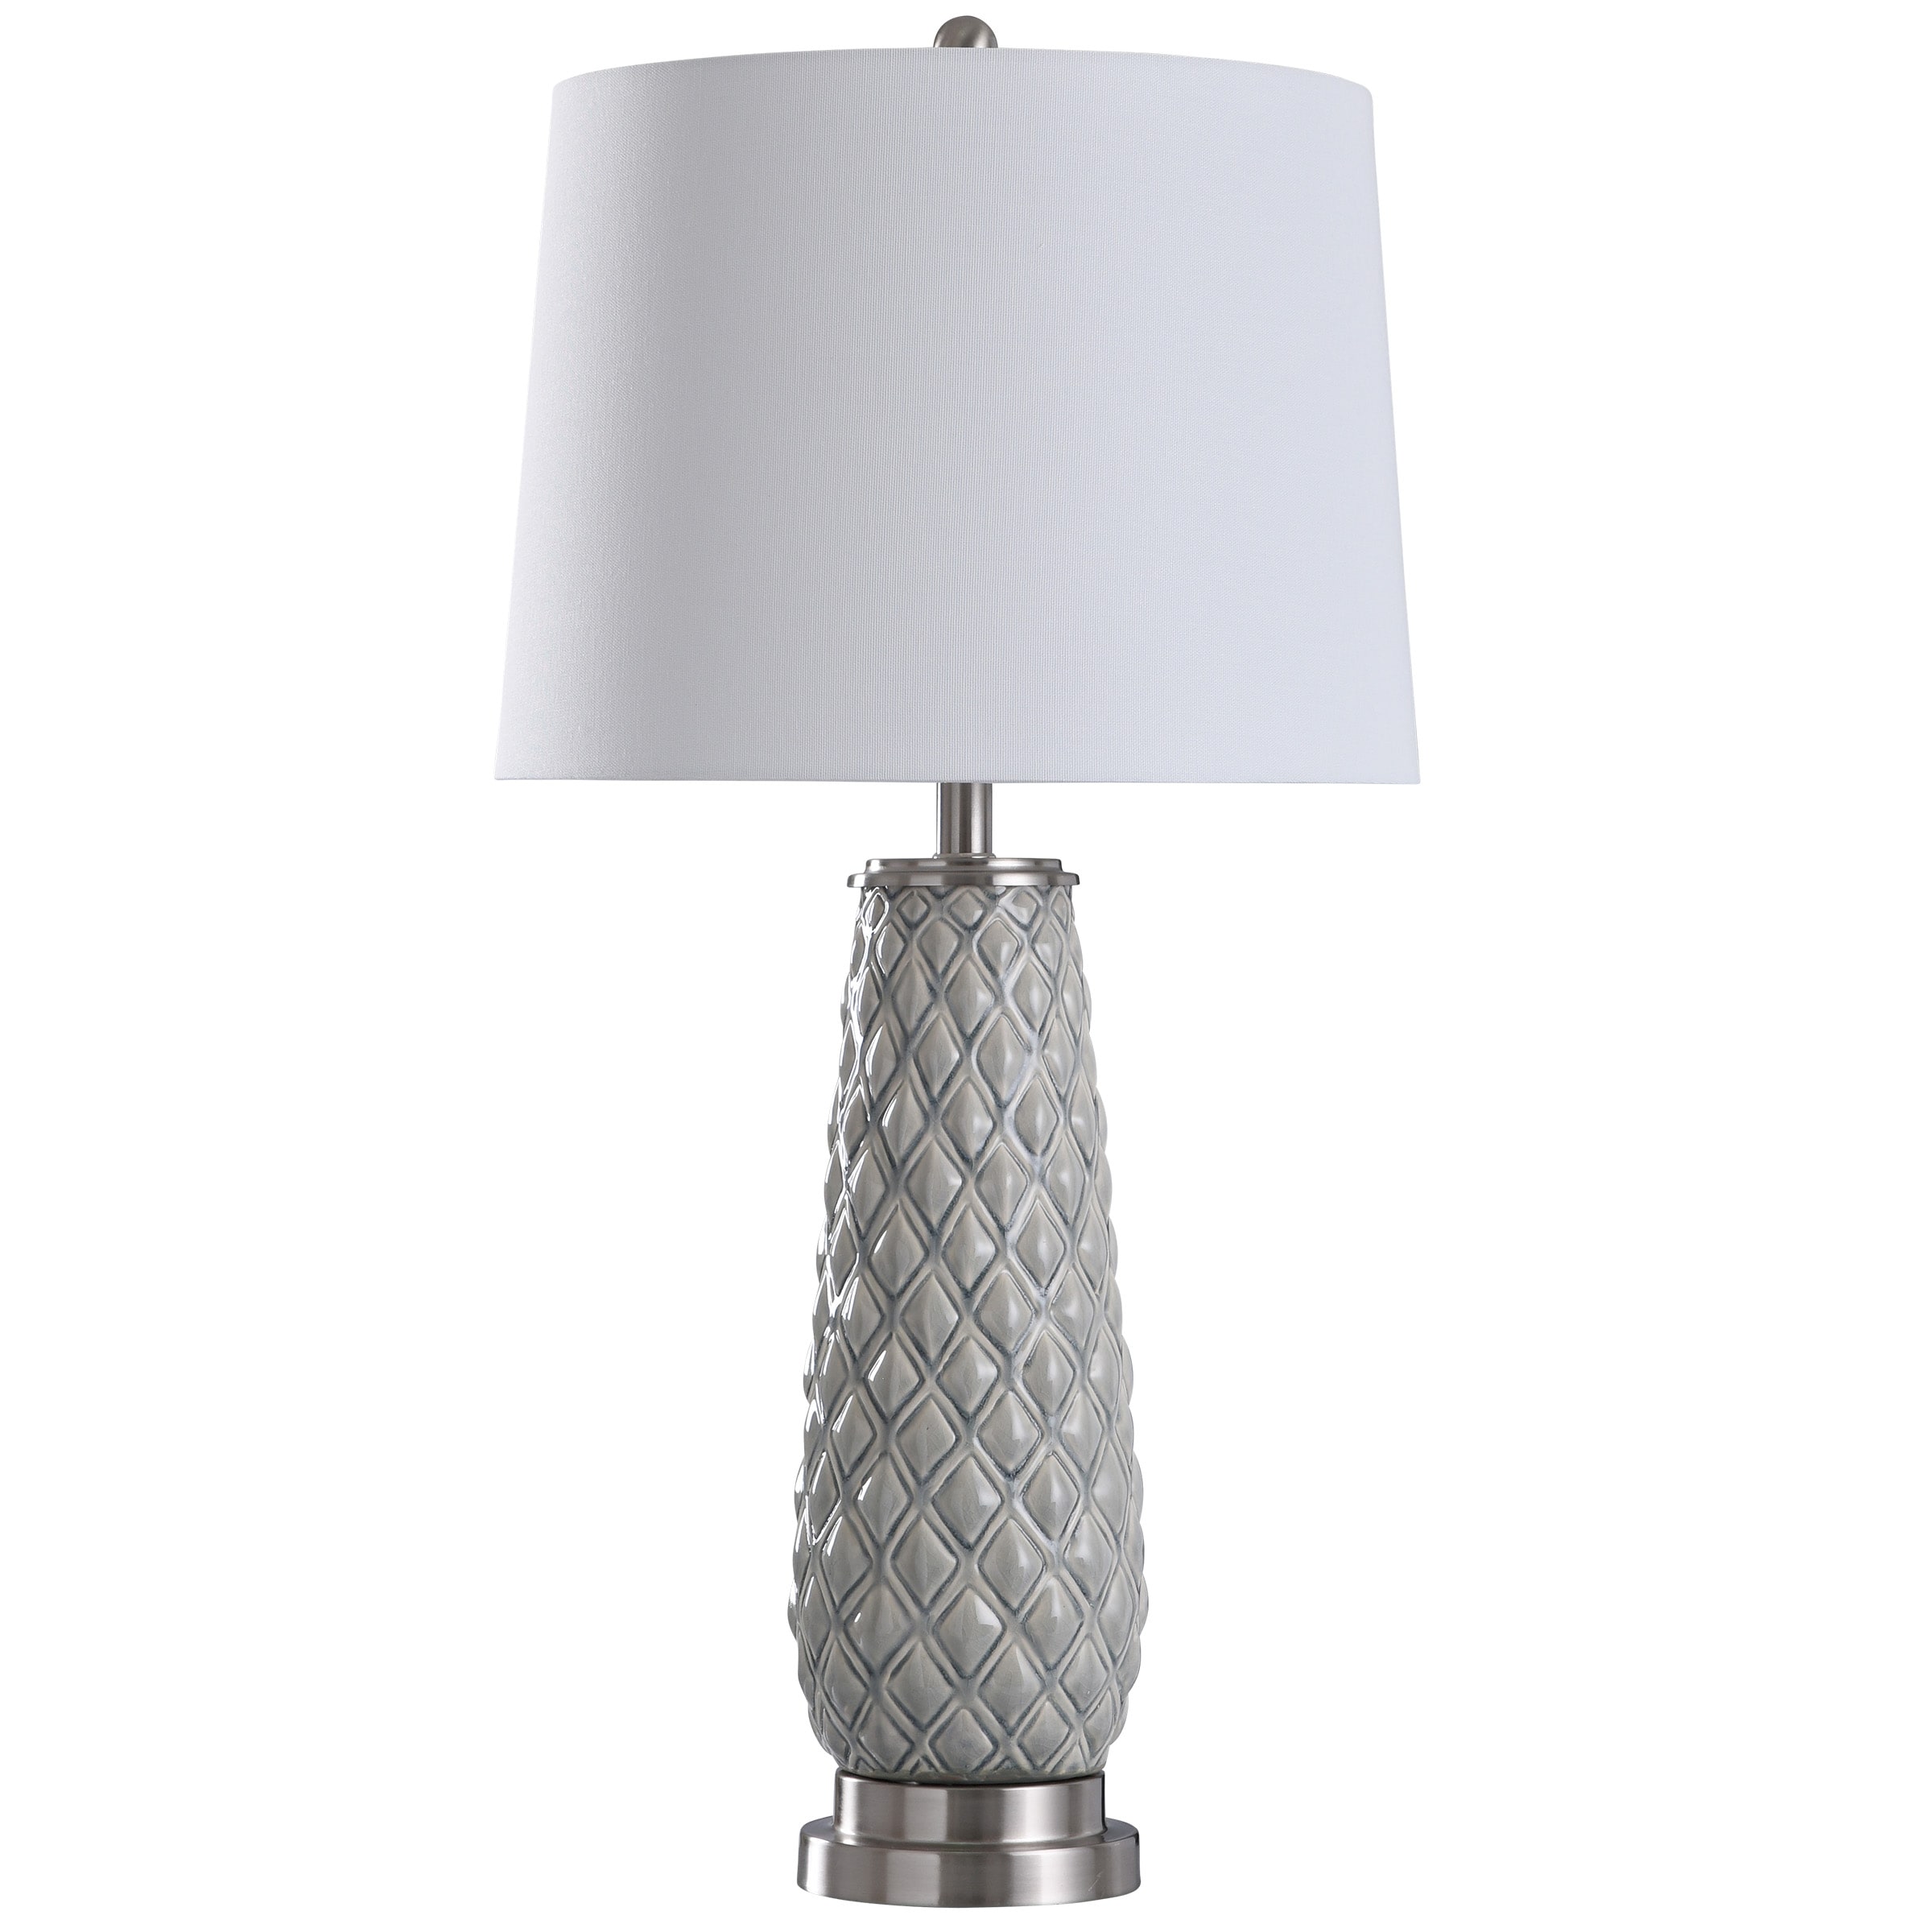 StyleCraft Home Collection Hanson 32-in Light Gray 3-Way Table Lamp with Fabric Shade